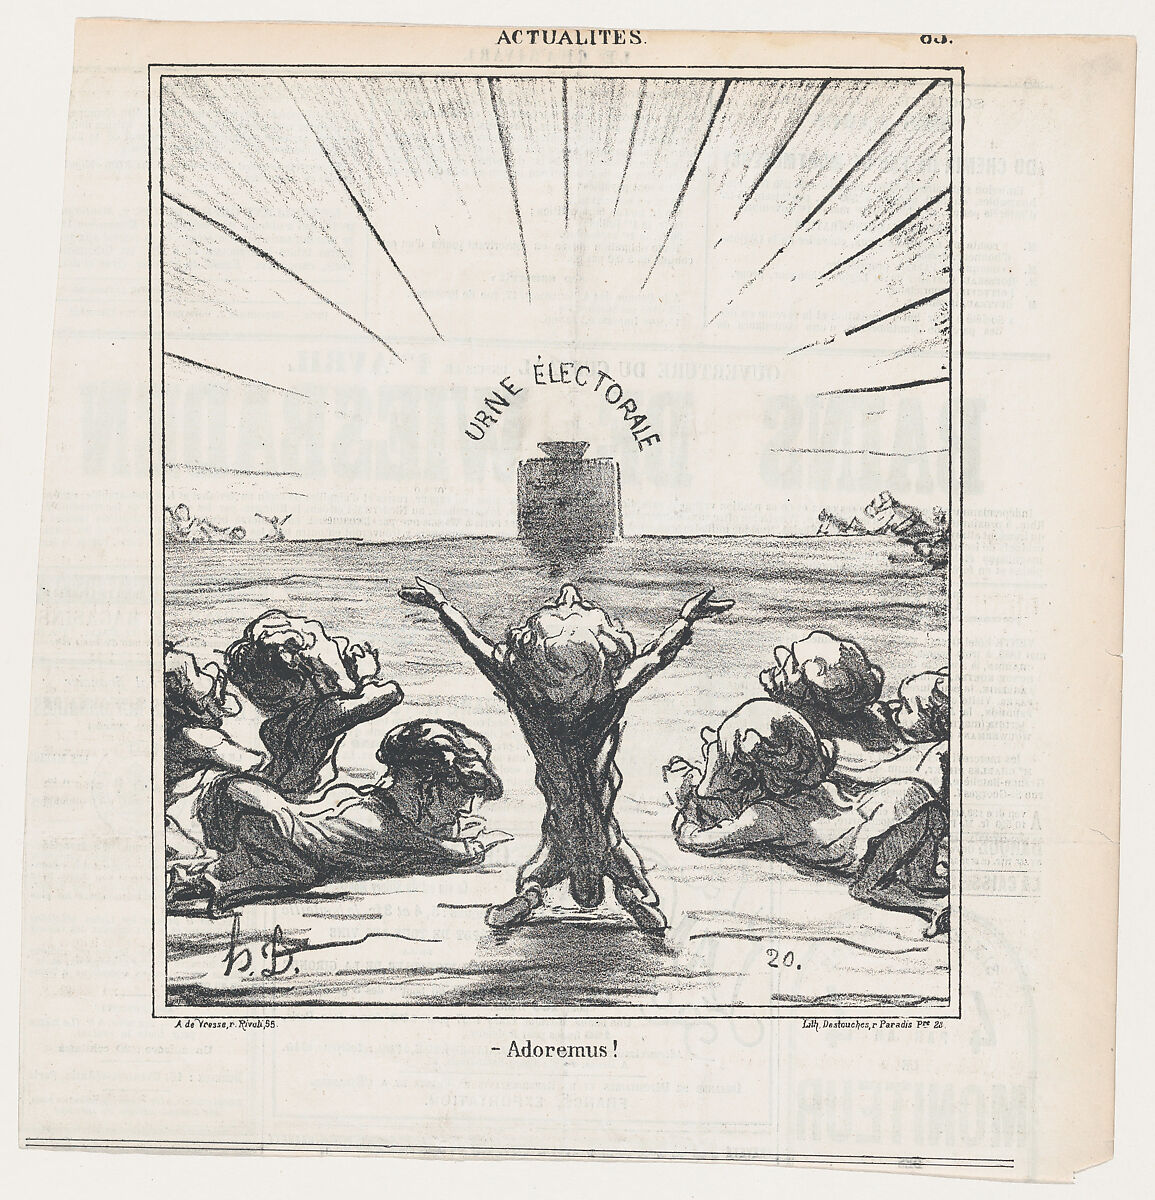 We worship you, beloved voter, from 'News of the day,' published in "Le Charivari", Honoré Daumier (French, Marseilles 1808–1879 Valmondois), Lithograph on newsprint; fourth state of four (Delteil) 